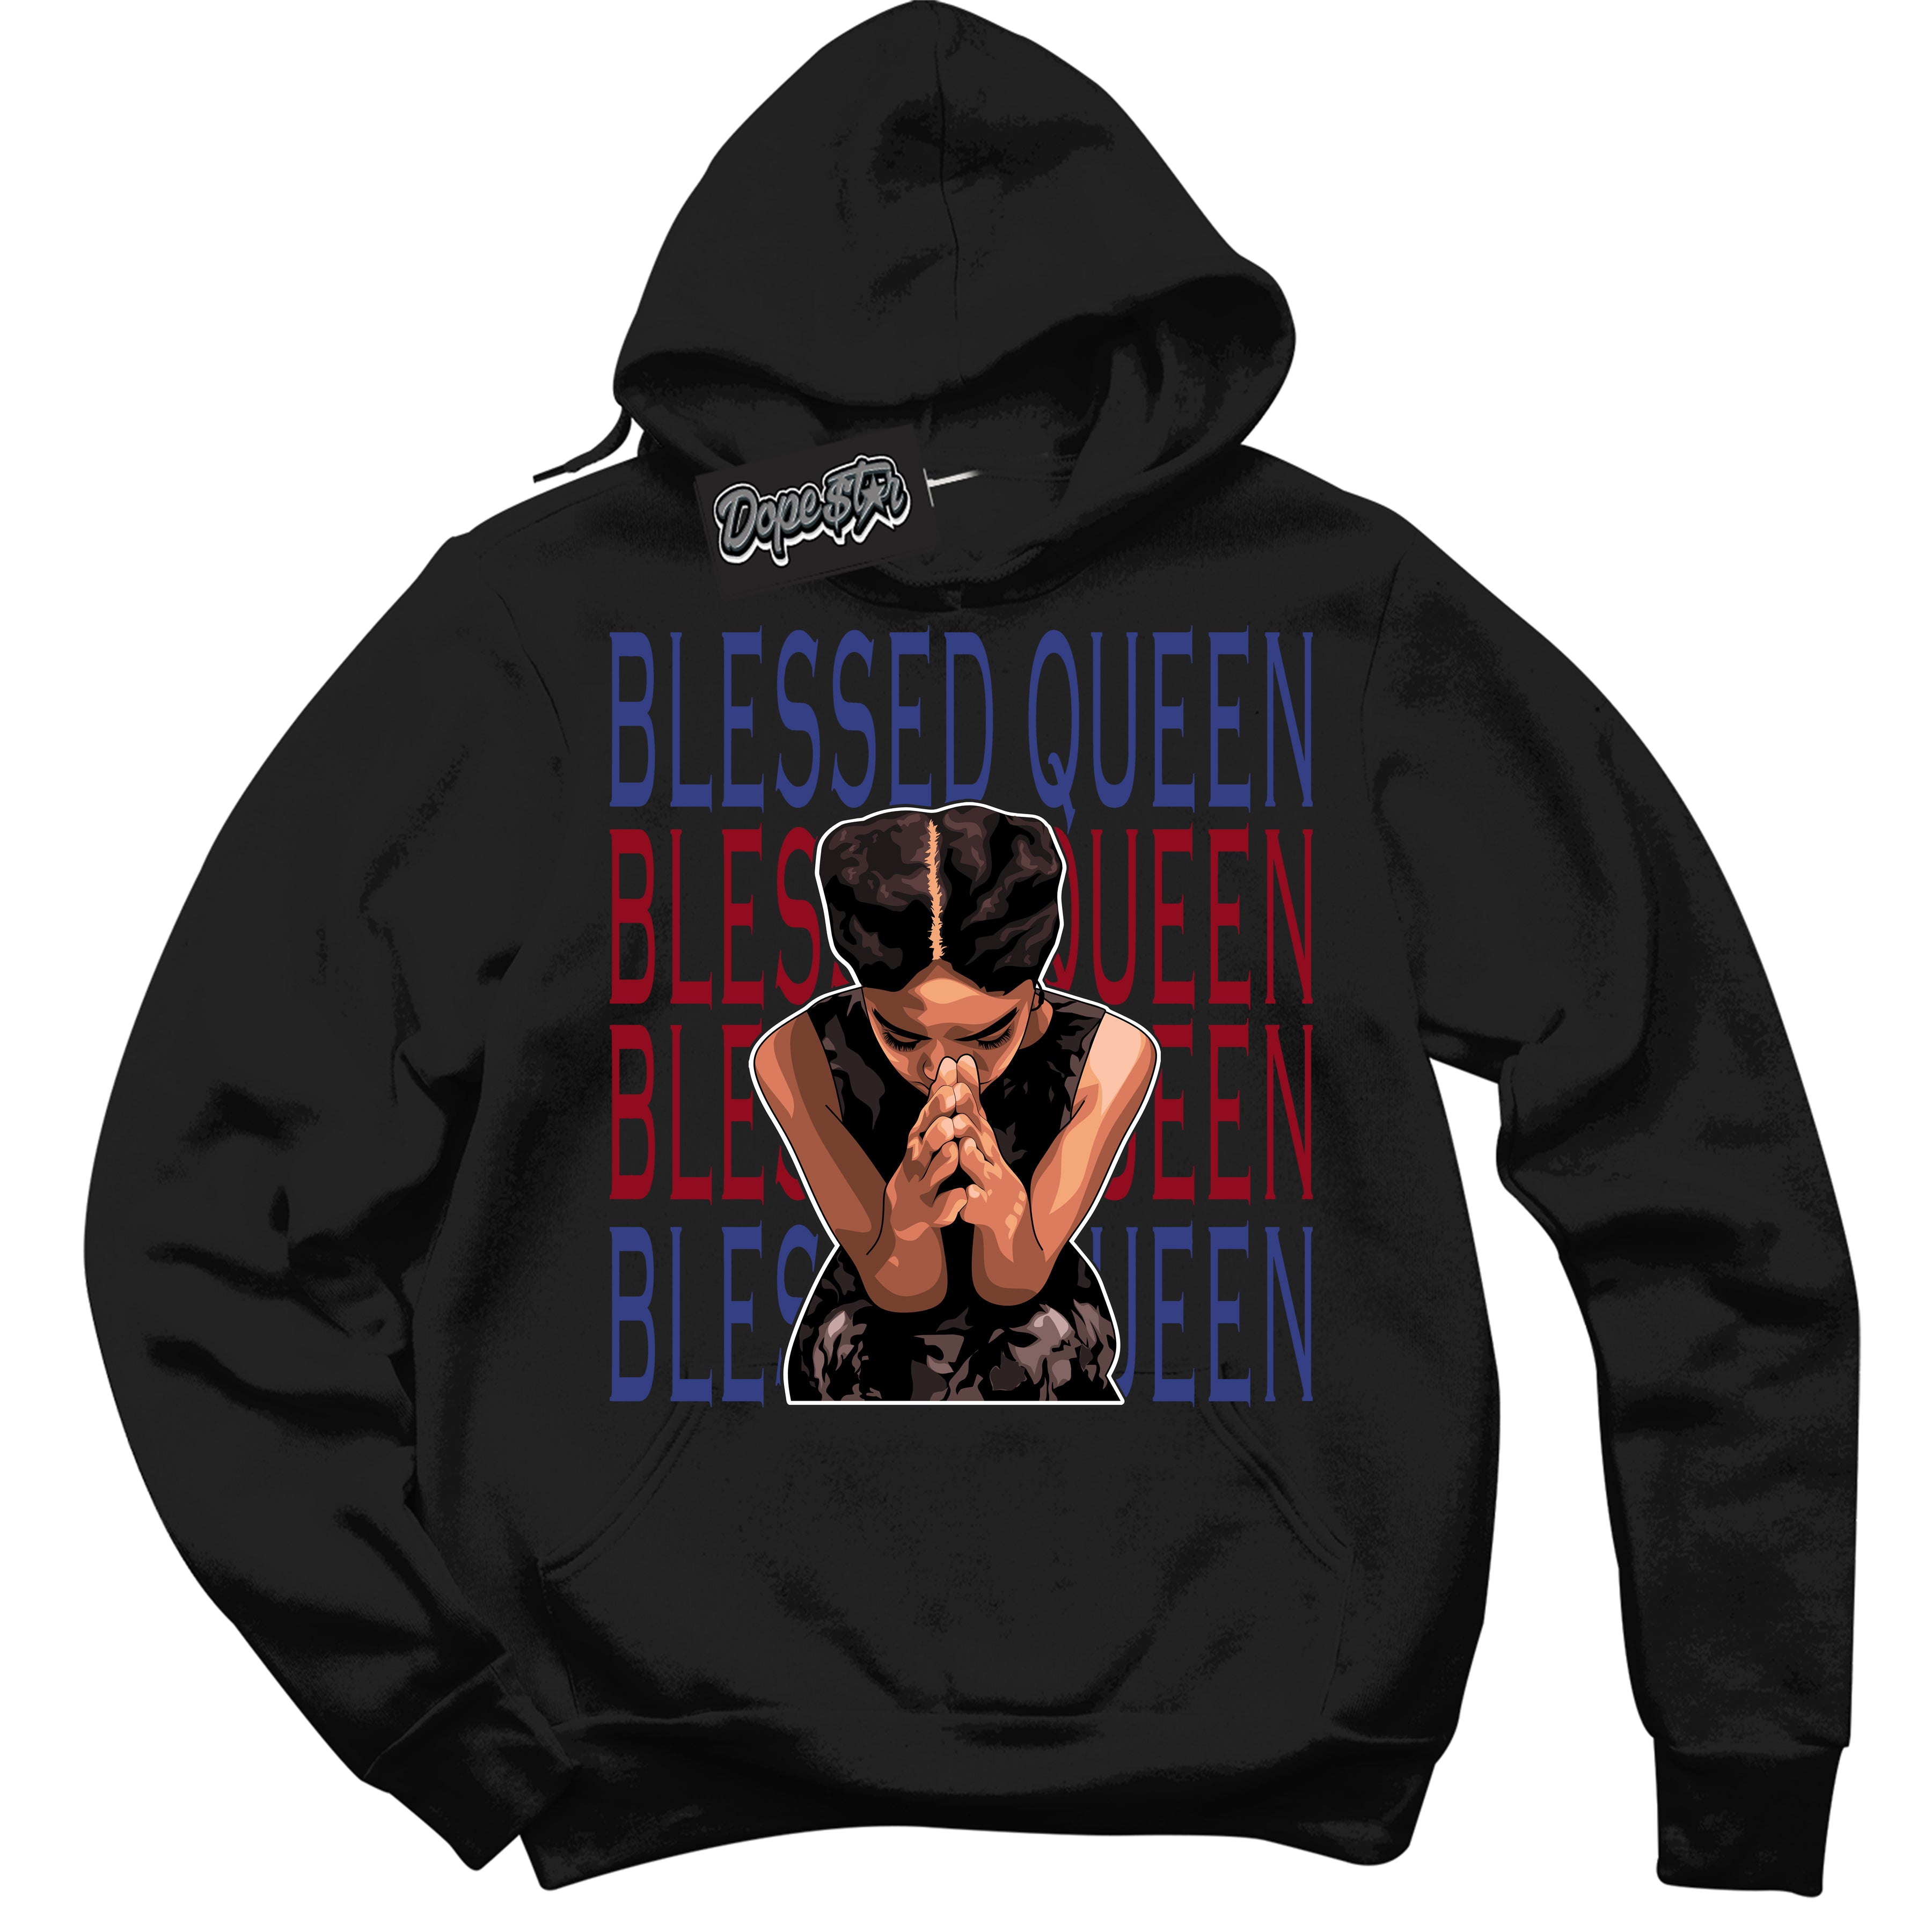 Cool Black Hoodie with “ Blessed Queen ”  design that Perfectly Matches Playoffs 8s Sneakers.